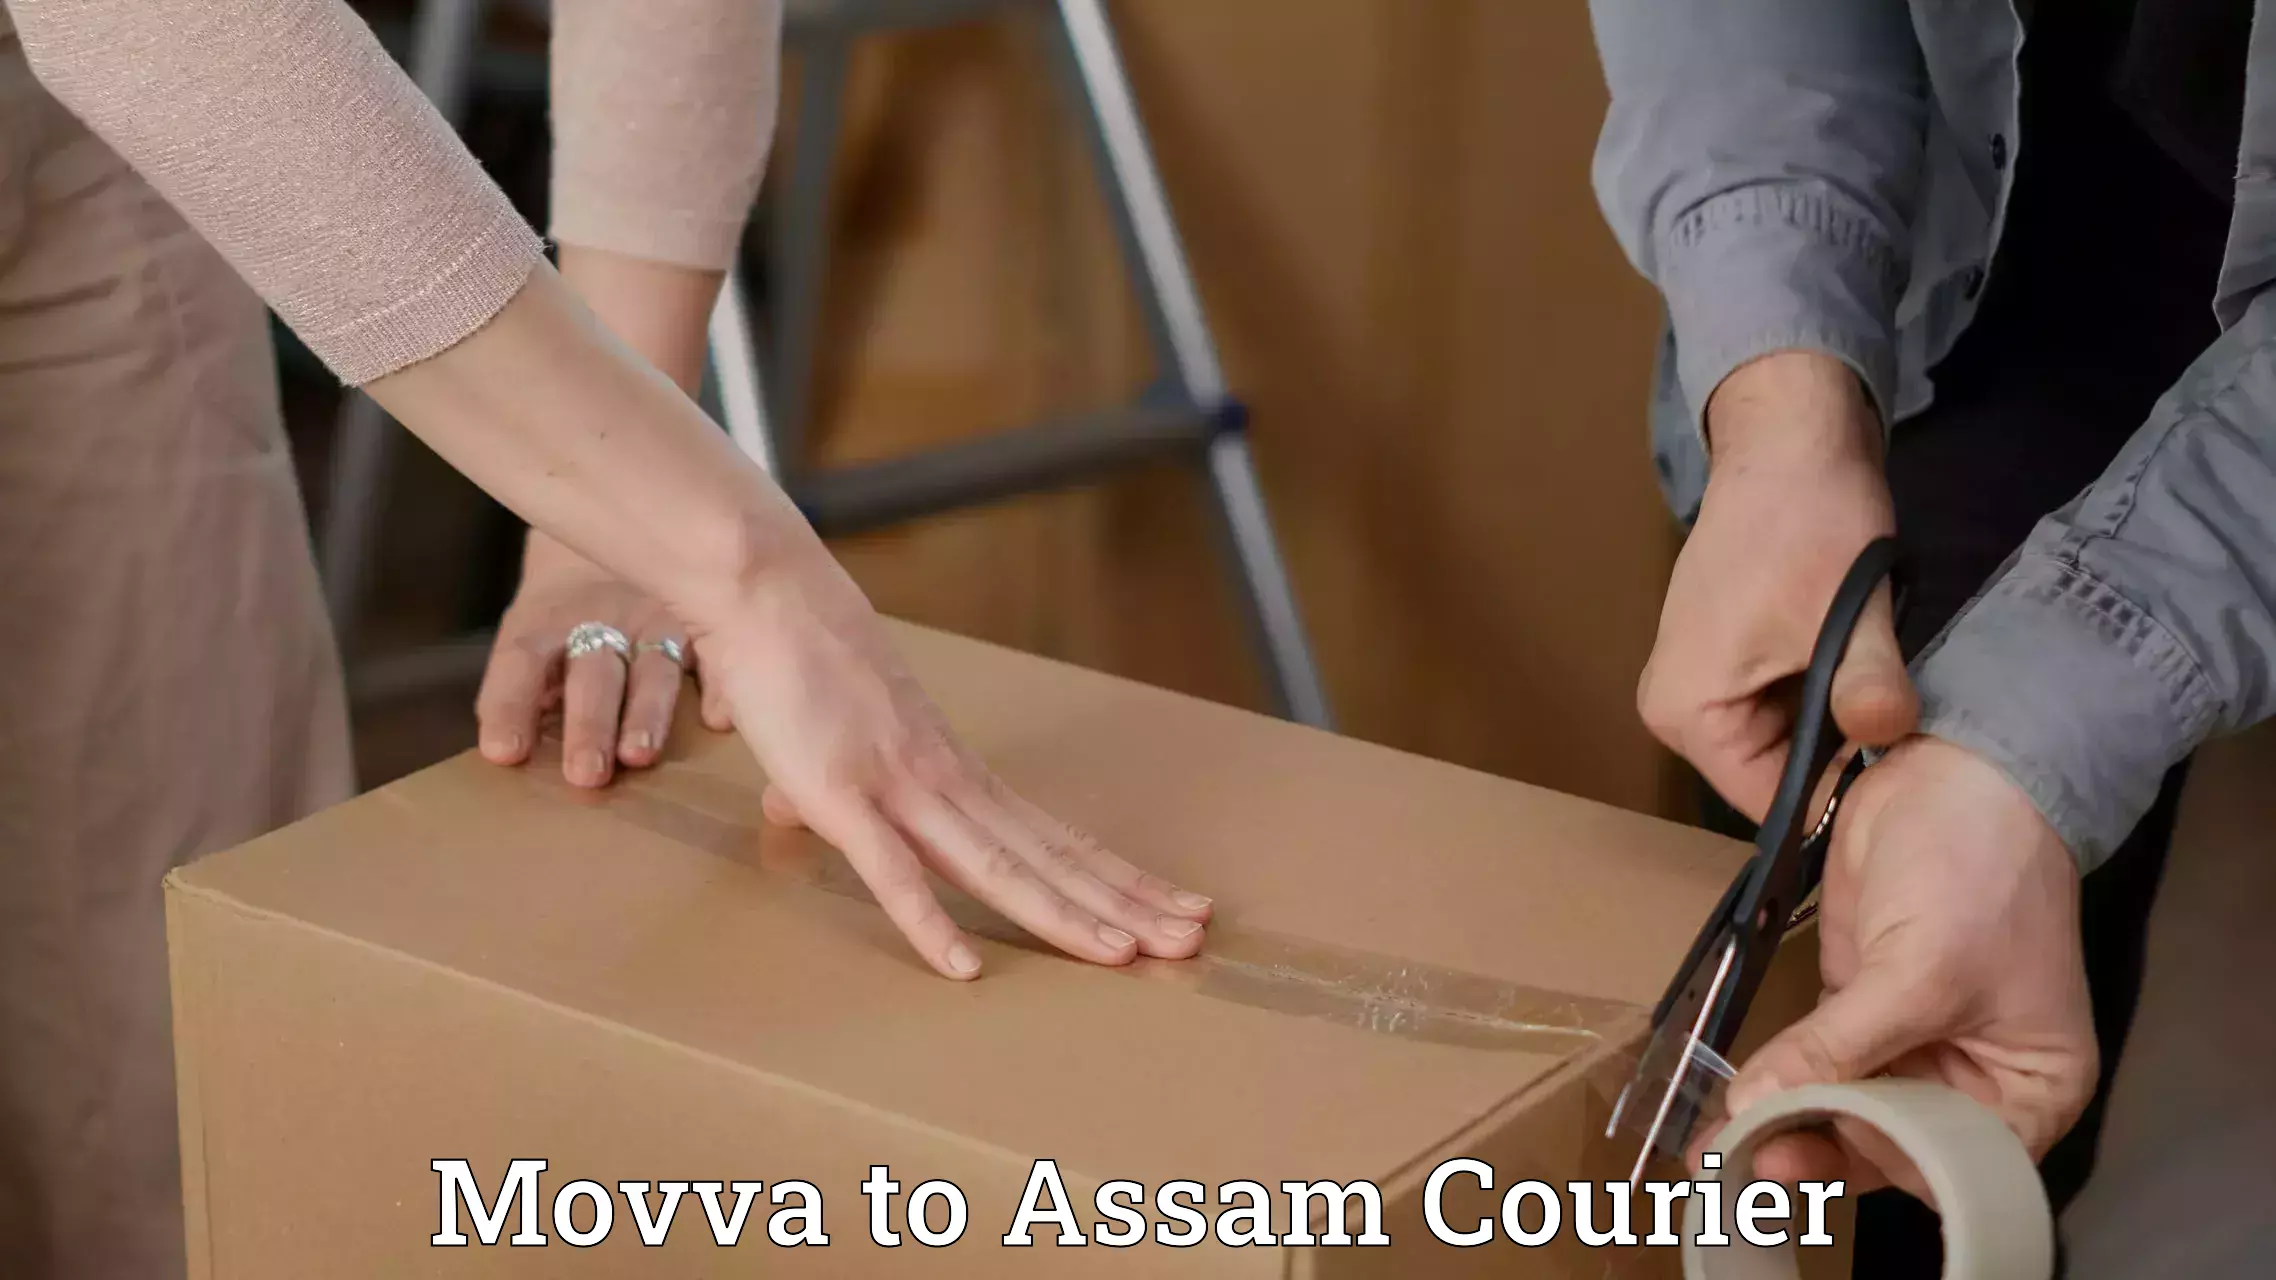 Reliable courier service Movva to Sonitpur